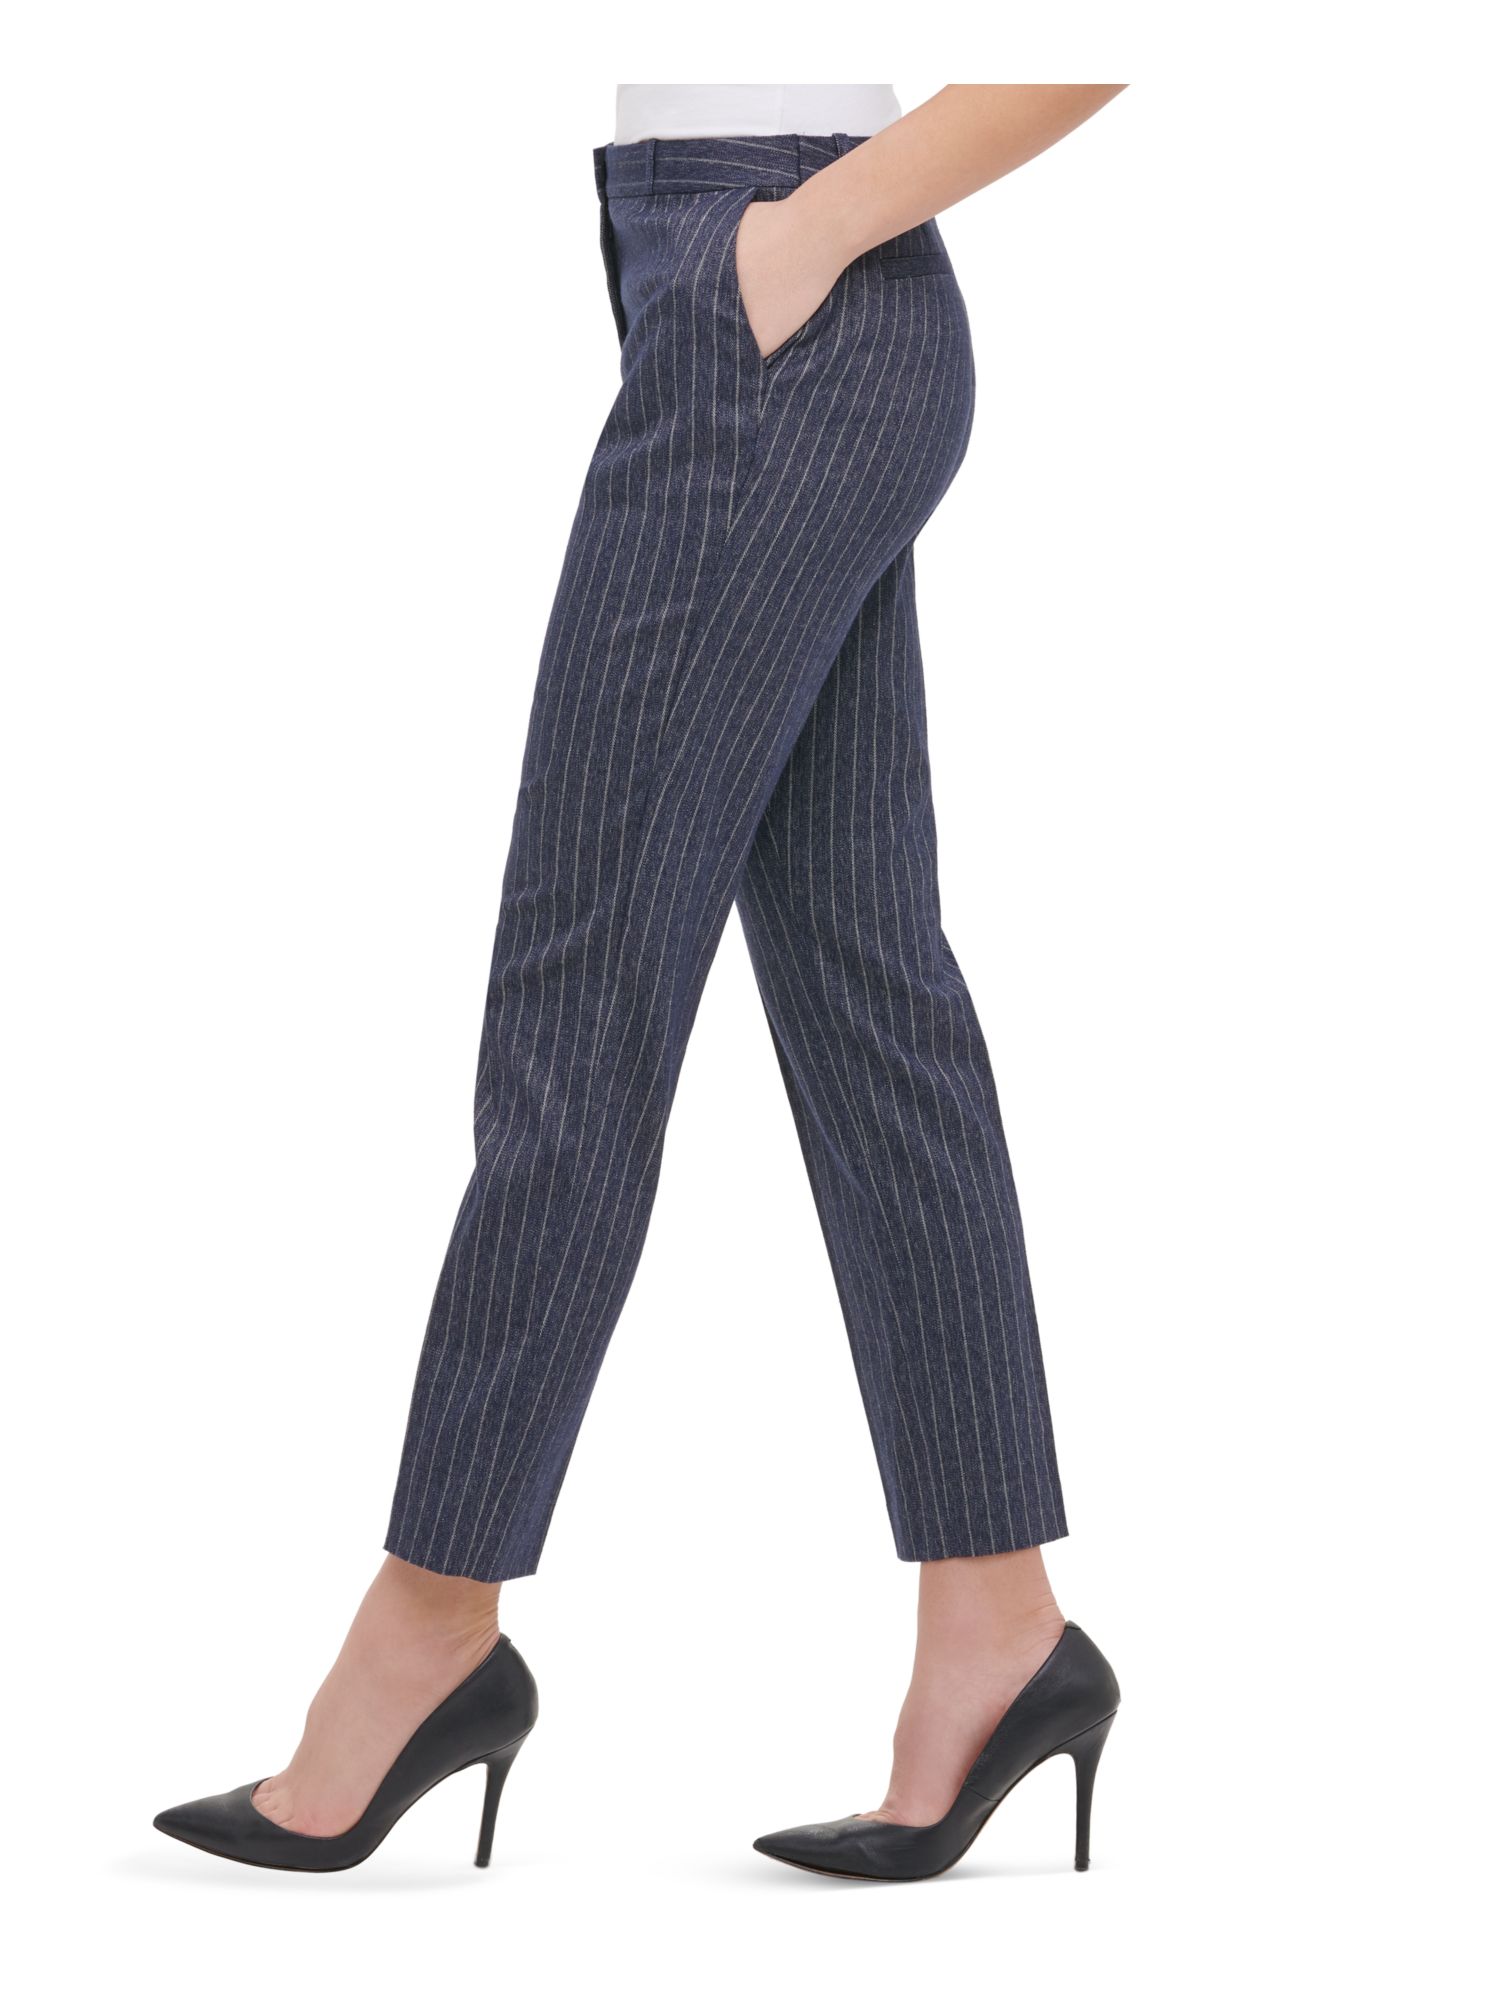 TOMMY HILFIGER Womens Navy Zippered Pinstripe Pants Size: 6 - image 3 of 4